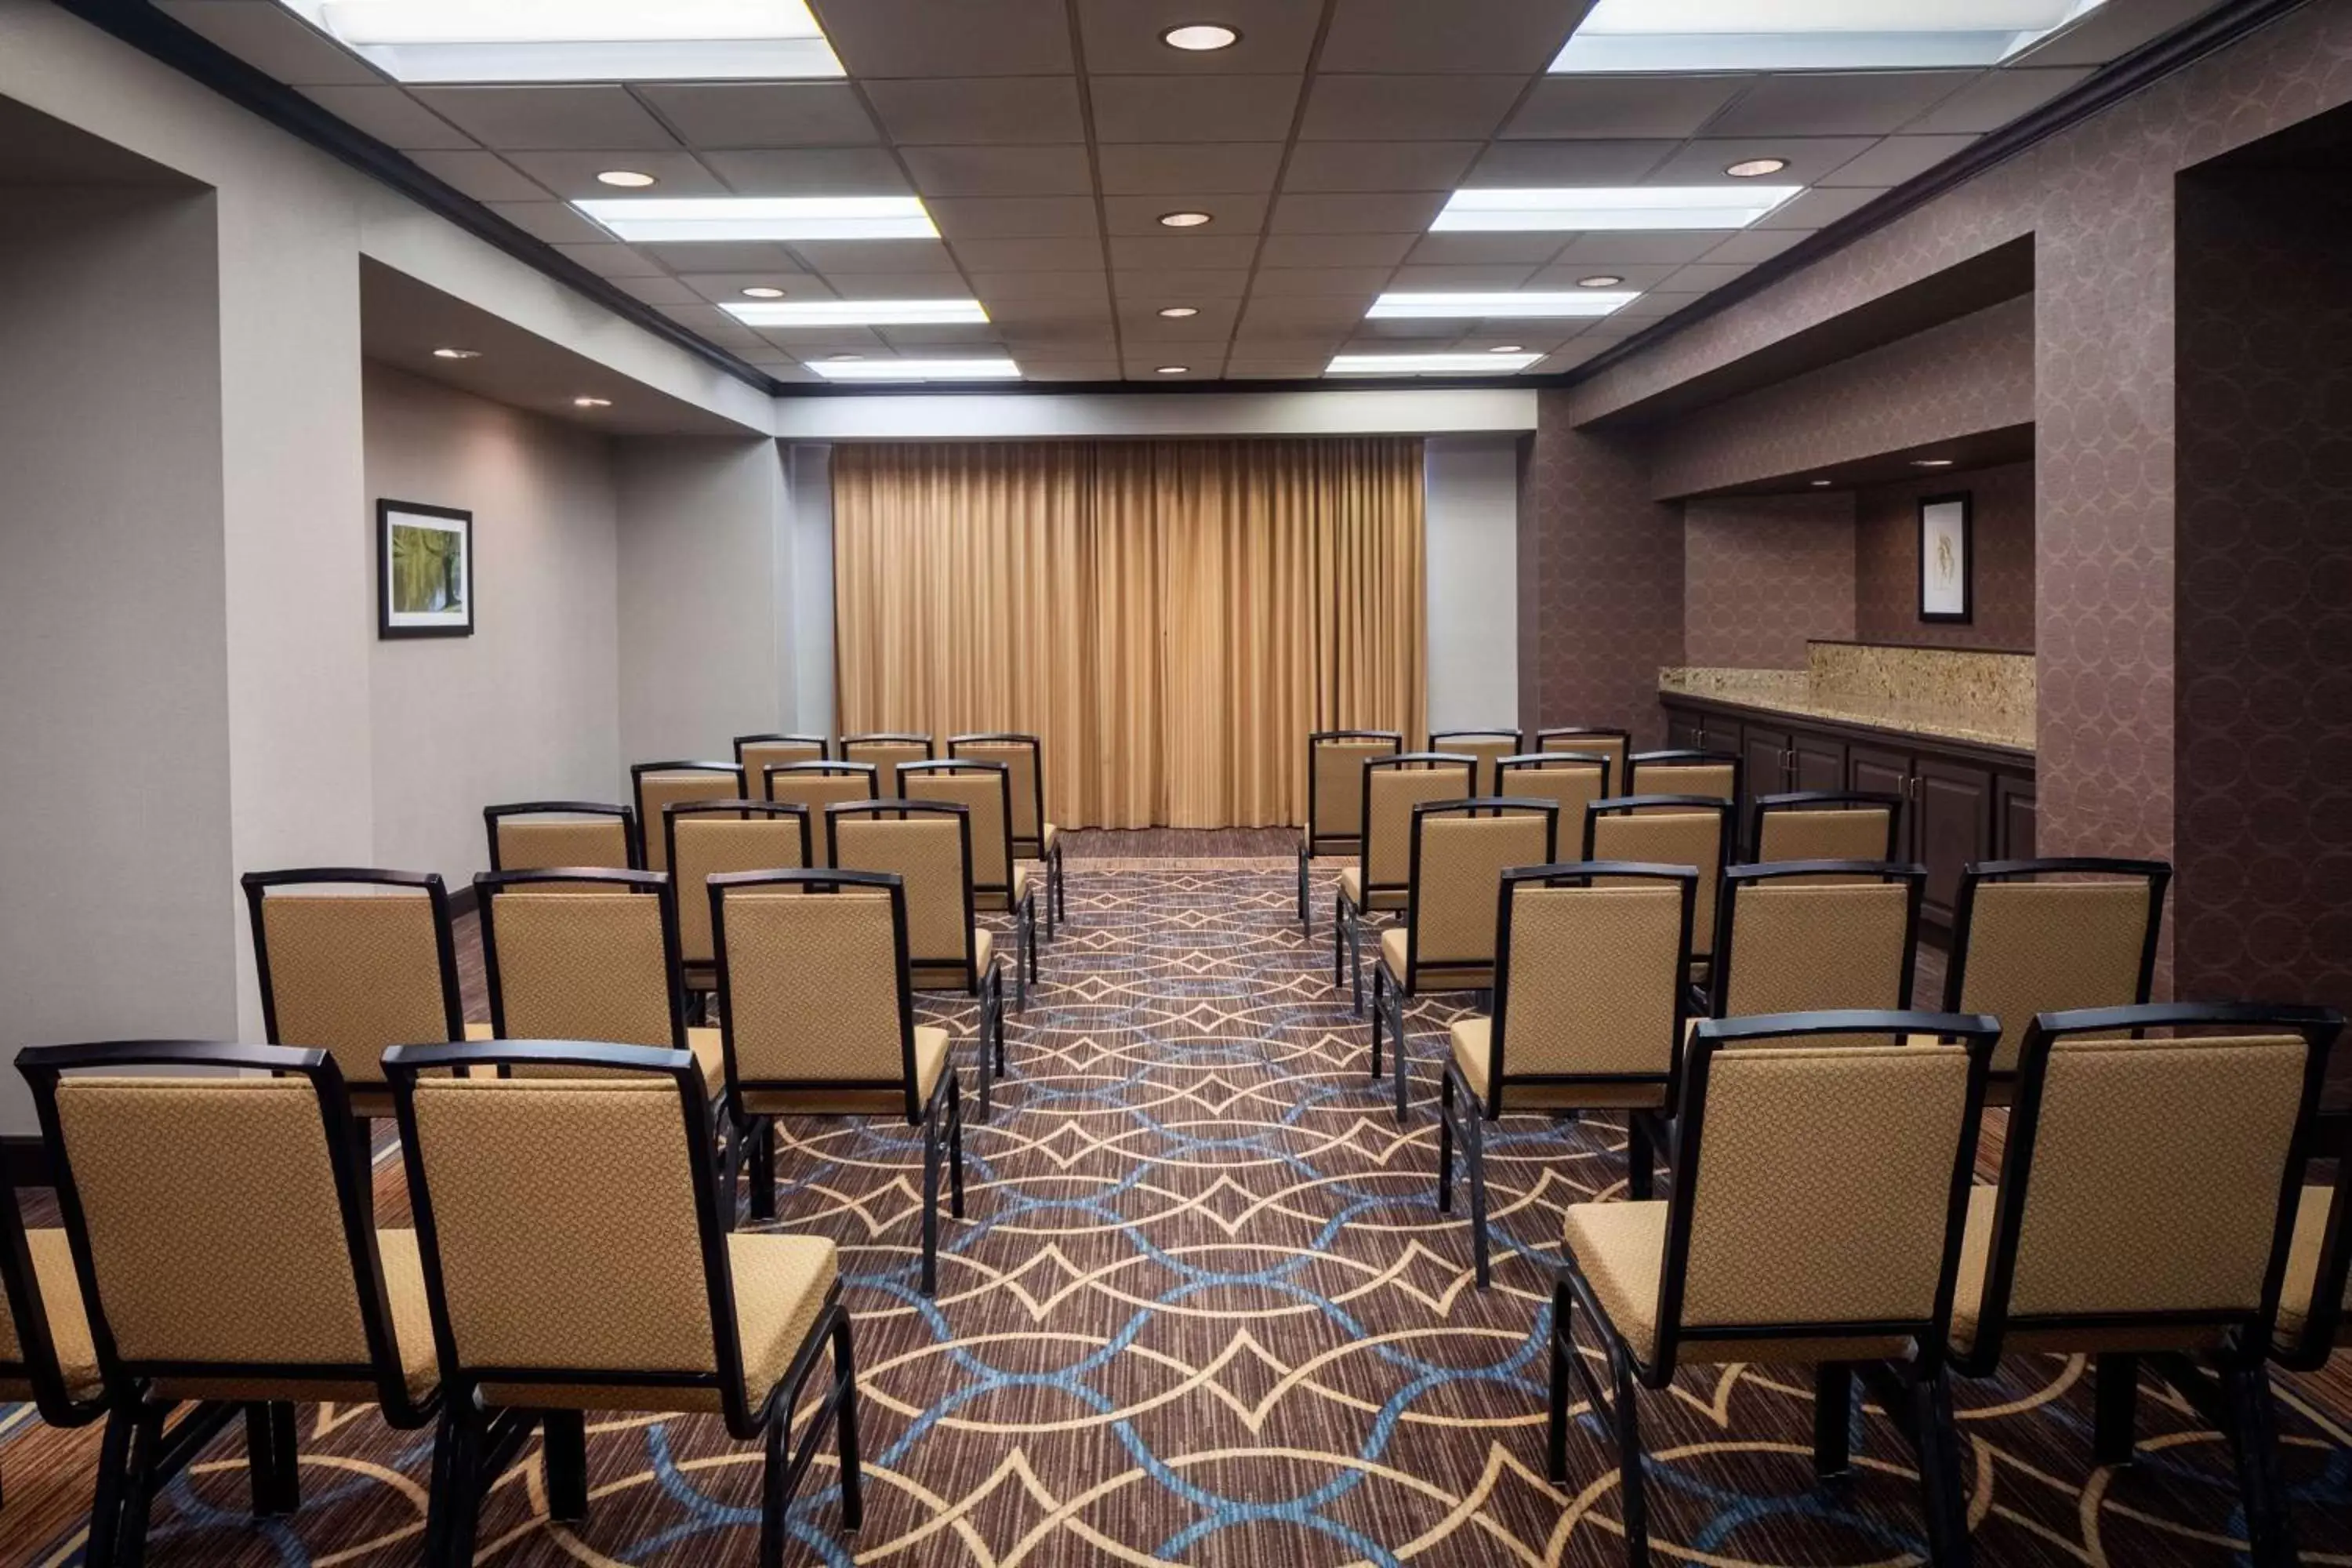 Meeting/conference room in DoubleTree by Hilton Silver Spring Washington DC North